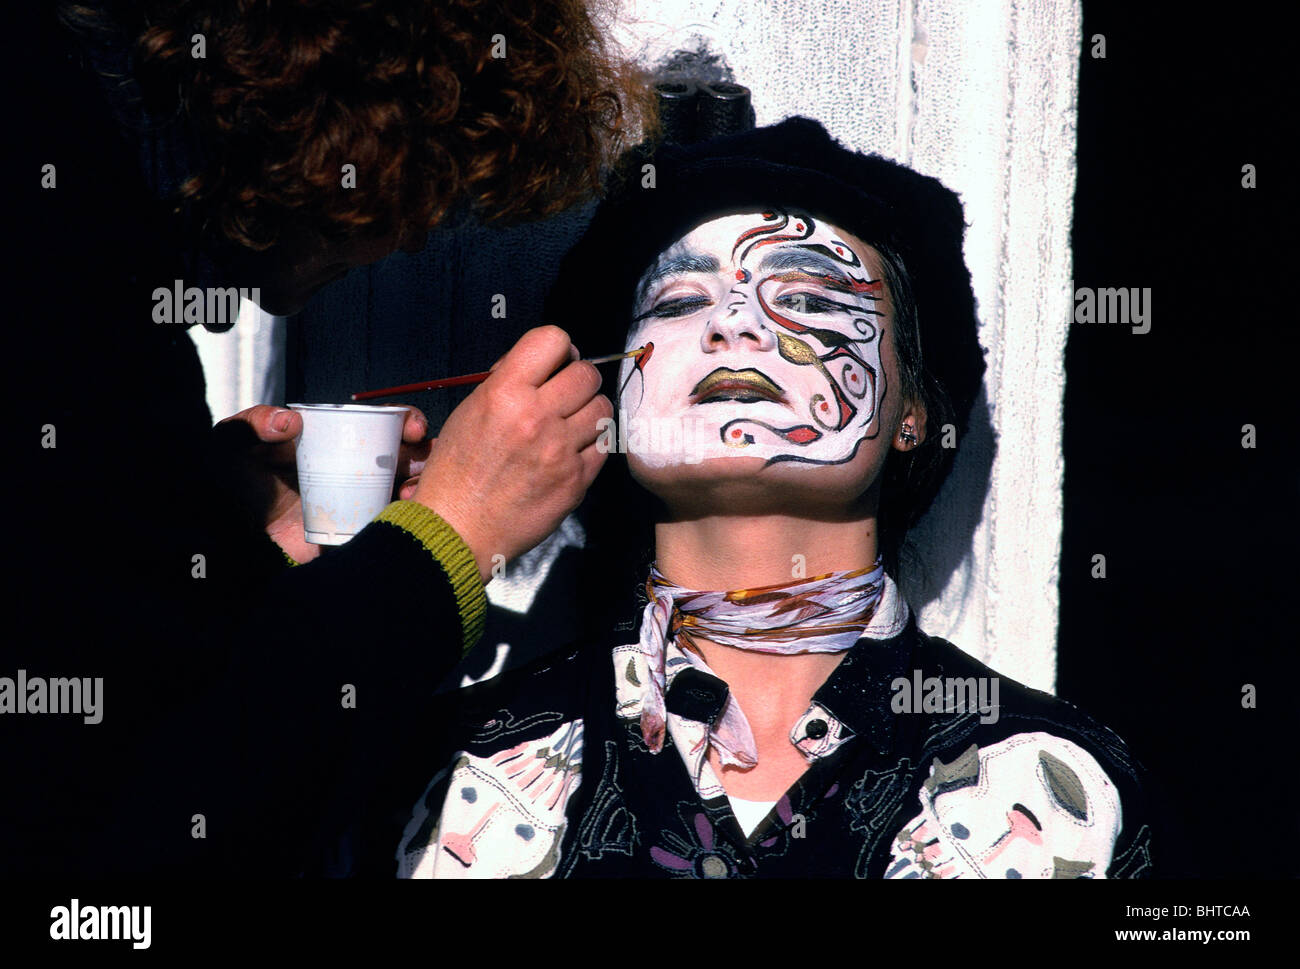 Person painting a man's face during carnival celebration, Venice, Italy Stock Photo